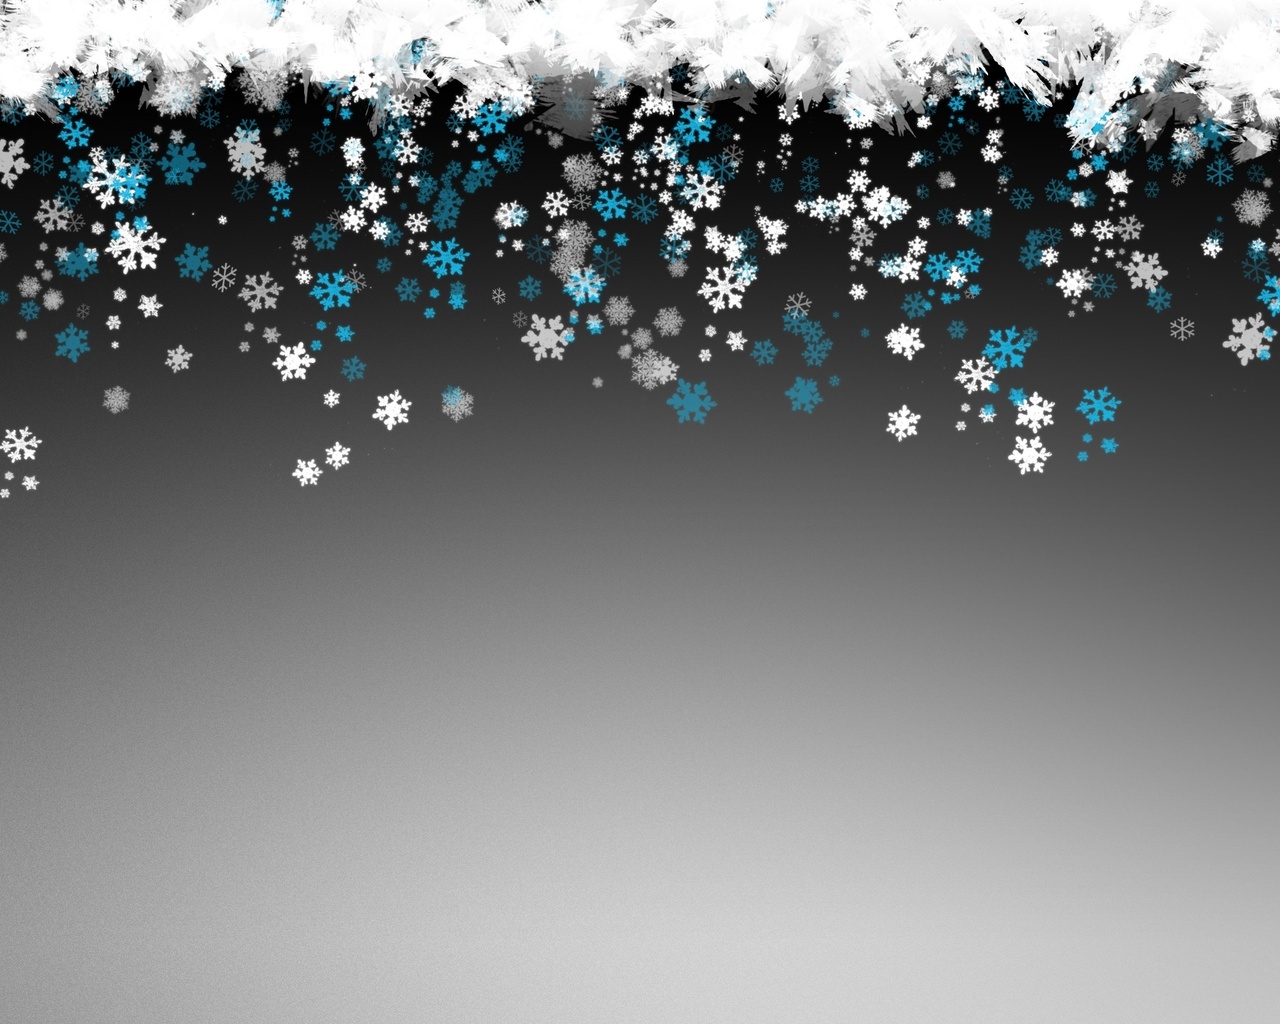 New Year Snowflakes backgrounds